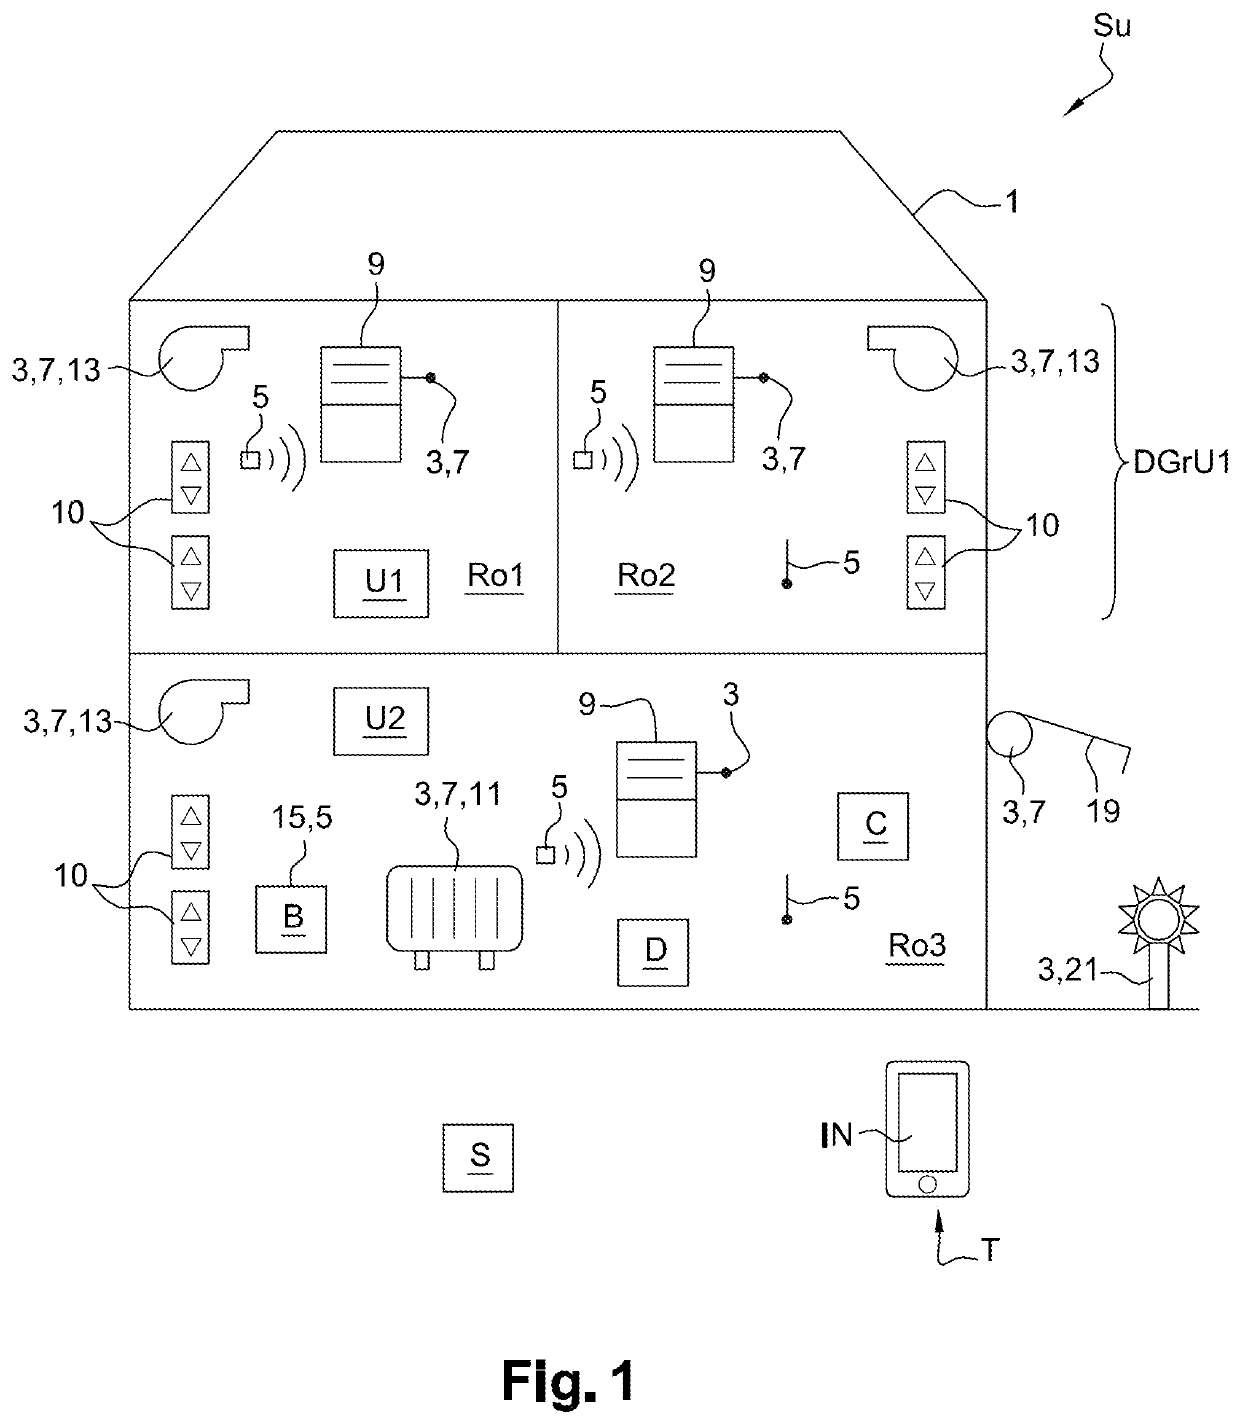 Method for configuring access to, remote controlling, and monitoring at least one home automation device forming part of a home automation installation